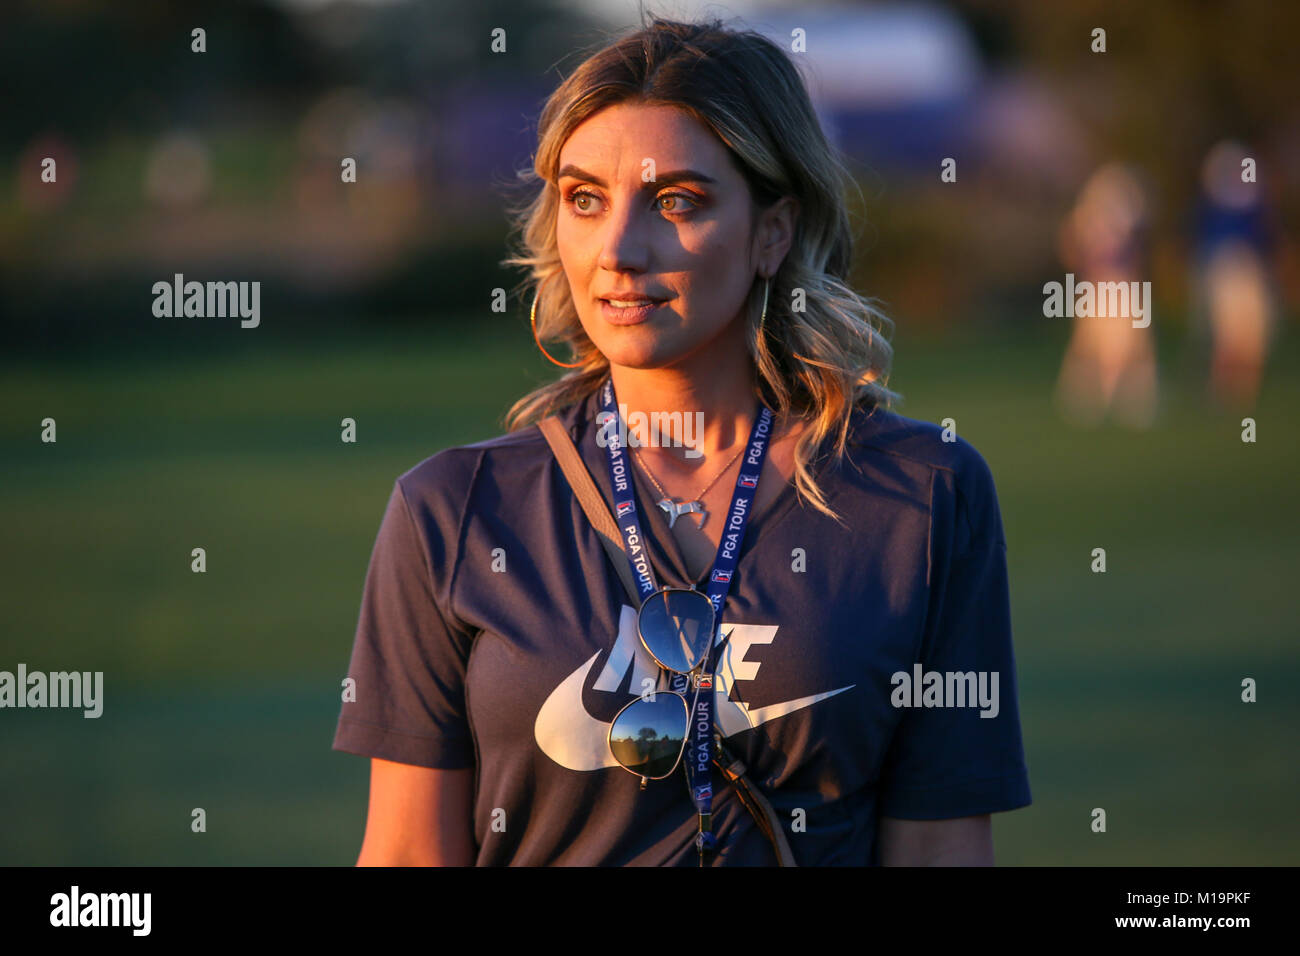 San Diego, USA. 28th Jan, 2018. Jason Day wife Ellie Harvey on 17th hole during the playoffs after the final round of the Farmers Open on South course at the Torrey Pines golf course in San Diego, USA on January 28, 2018. Jevone Moore Credit: csm/Alamy Live News Stock Photo